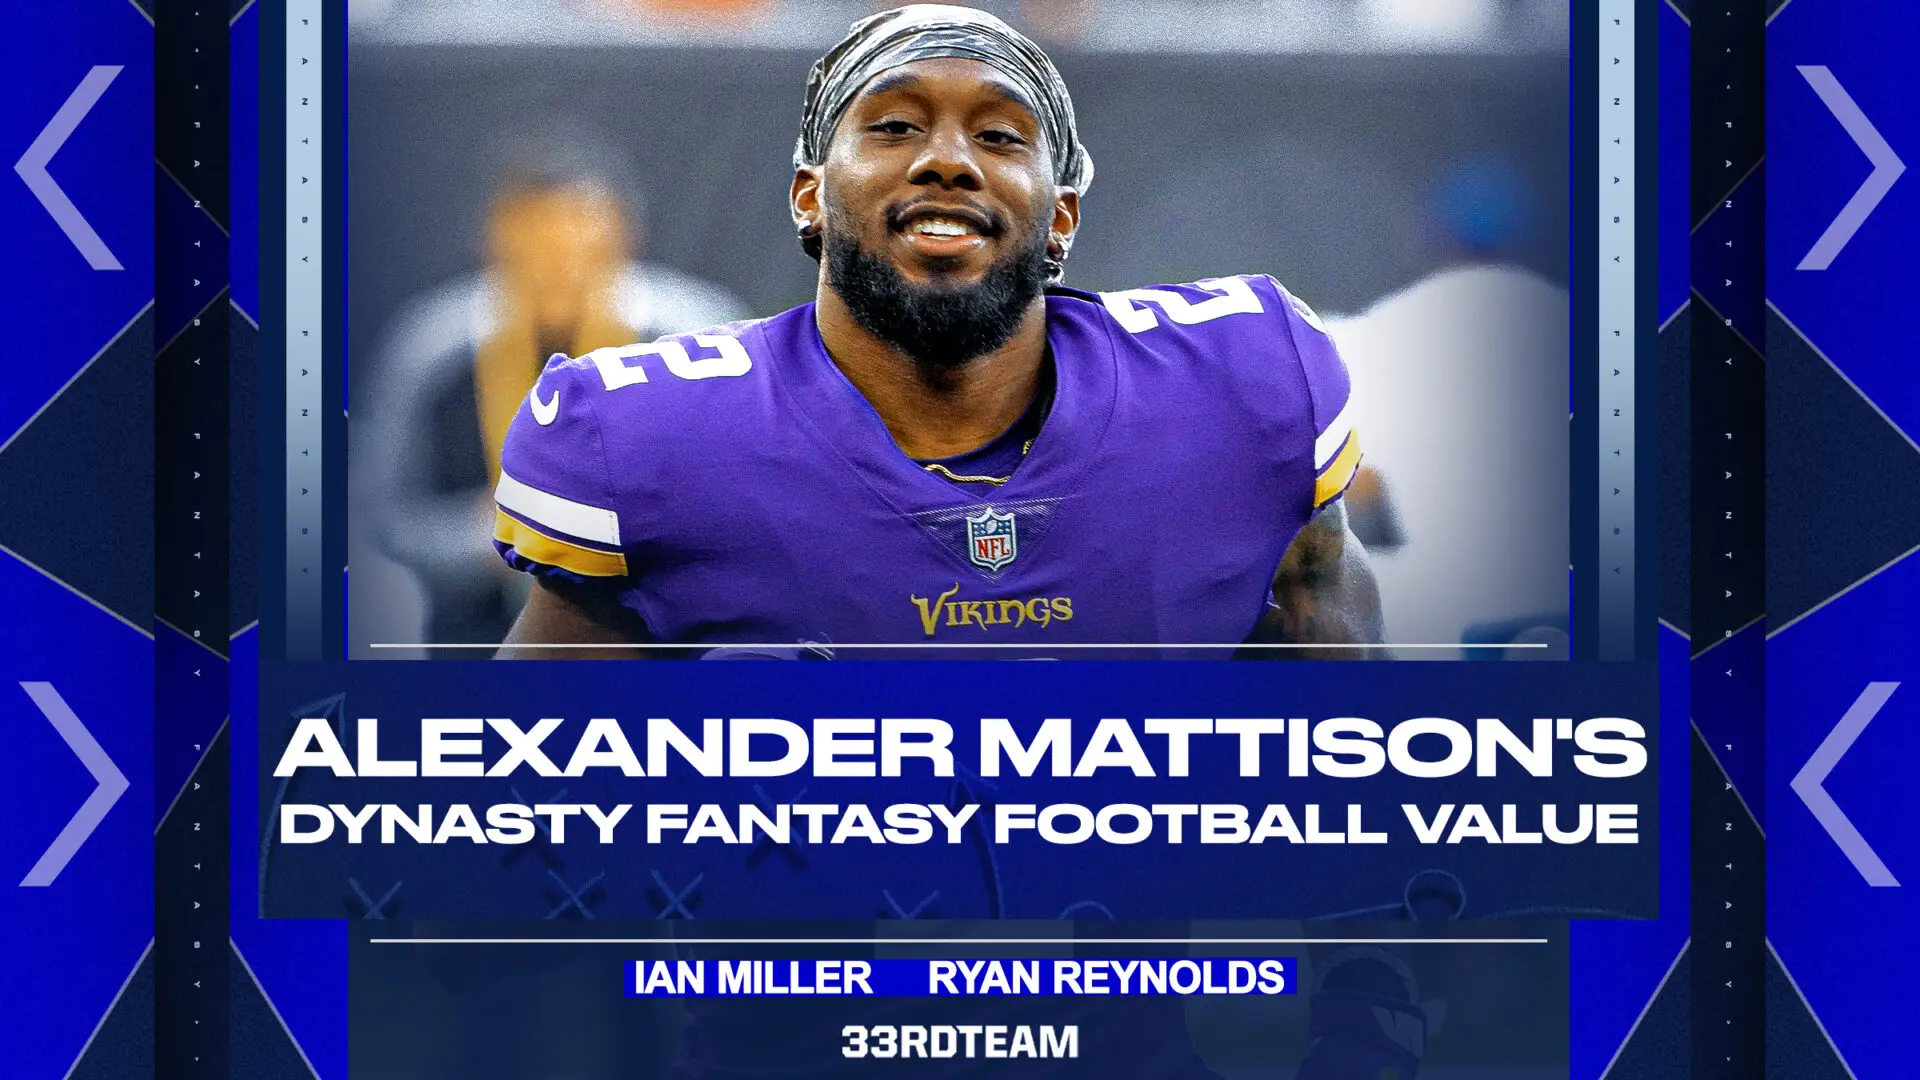 What Is Alexander Mattison's Dynasty Fantasy Football Value?